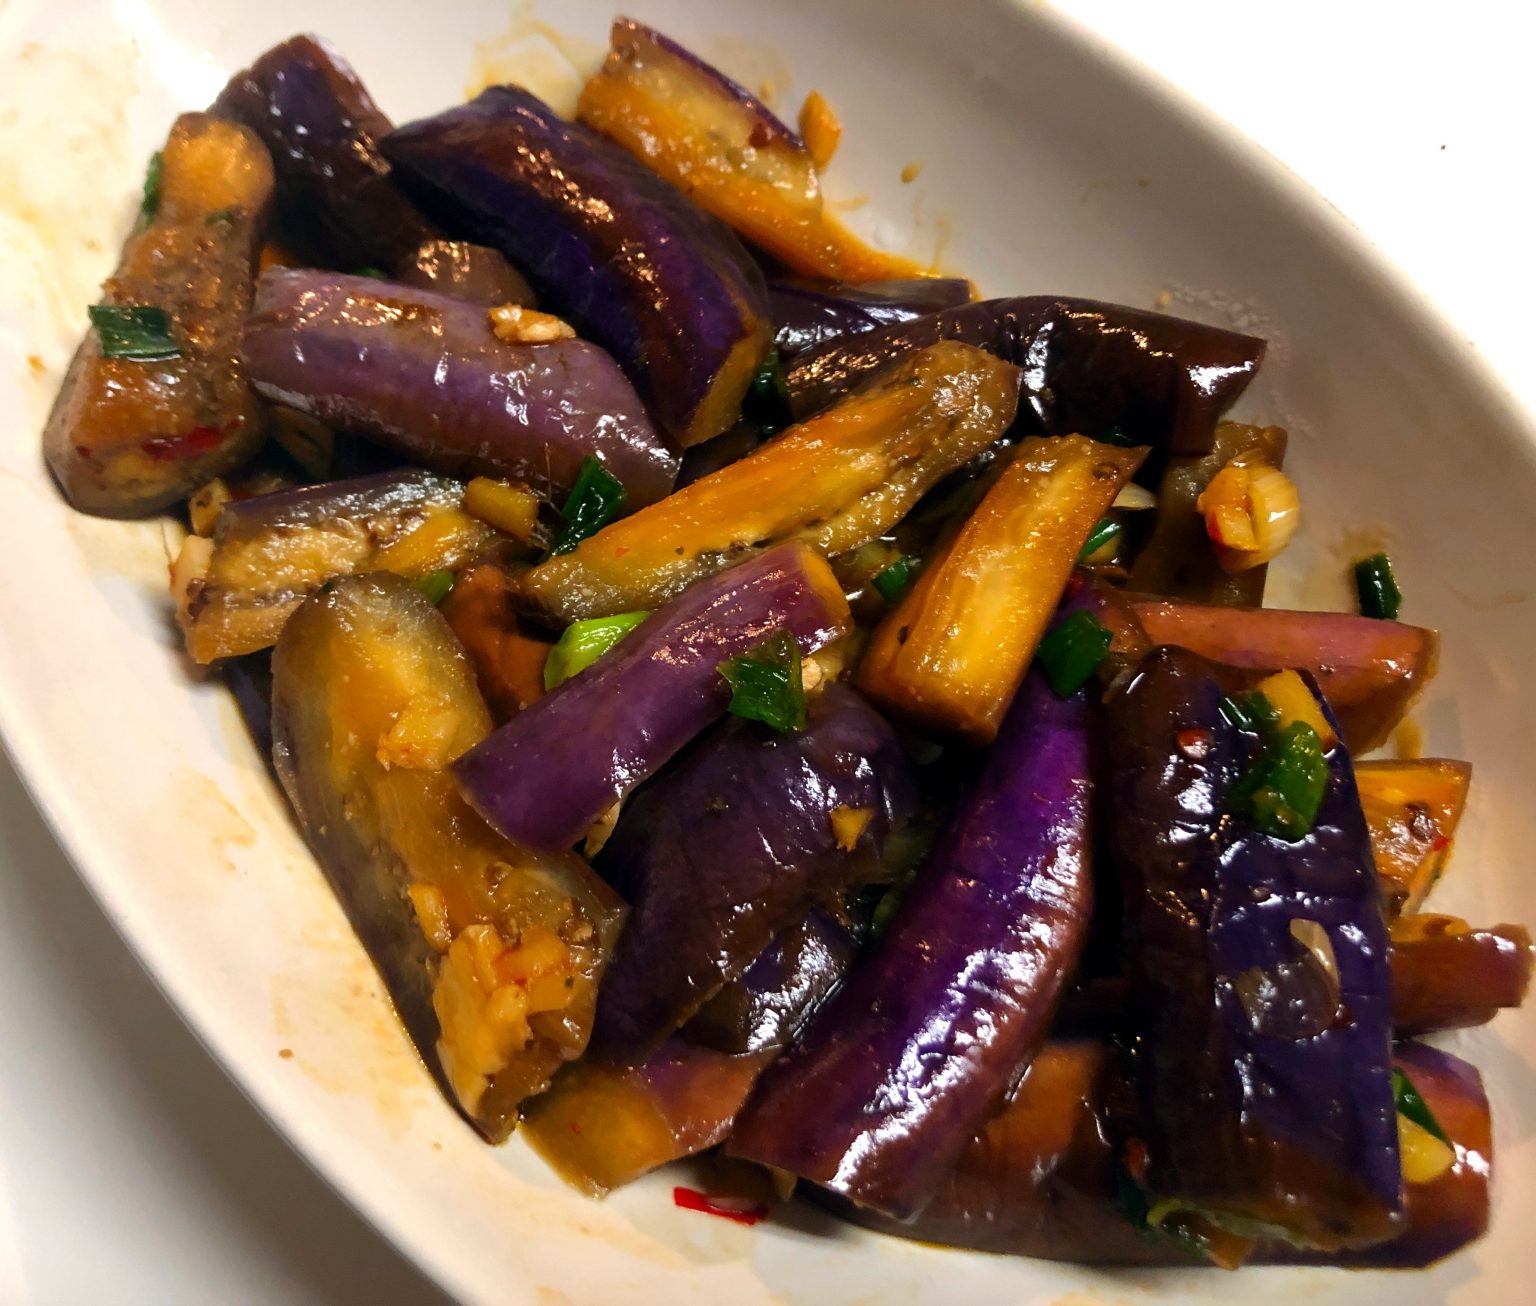 Chinese Eggplant in Garlic Sauce • Oh Snap! Let's Eat!